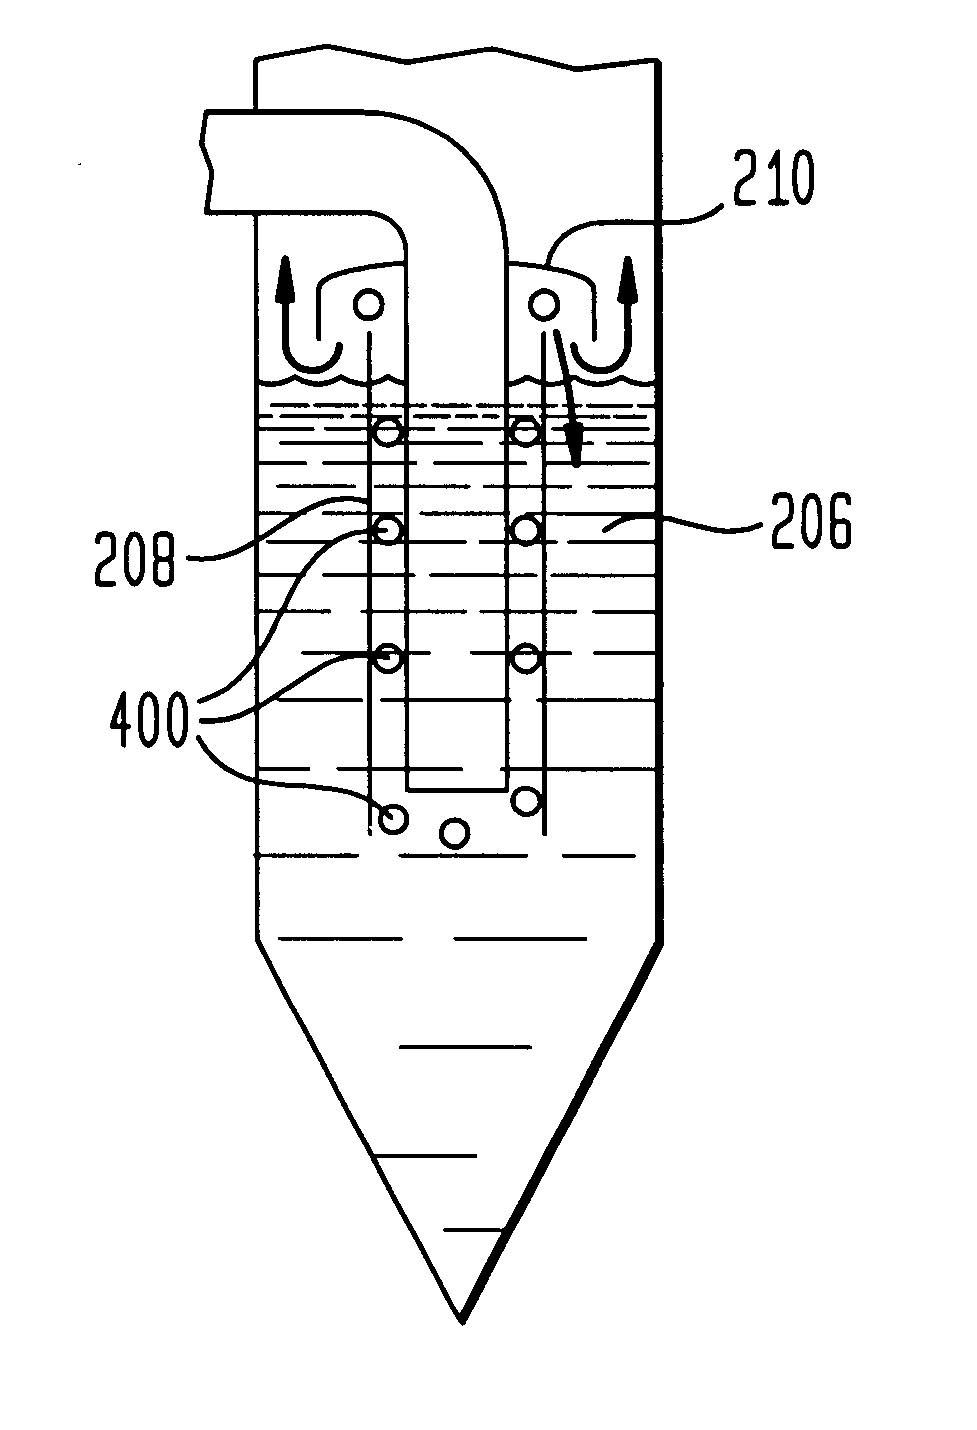 Method and apparatus for removing carbonyl sulfide from a gas stream via wet scrubbing